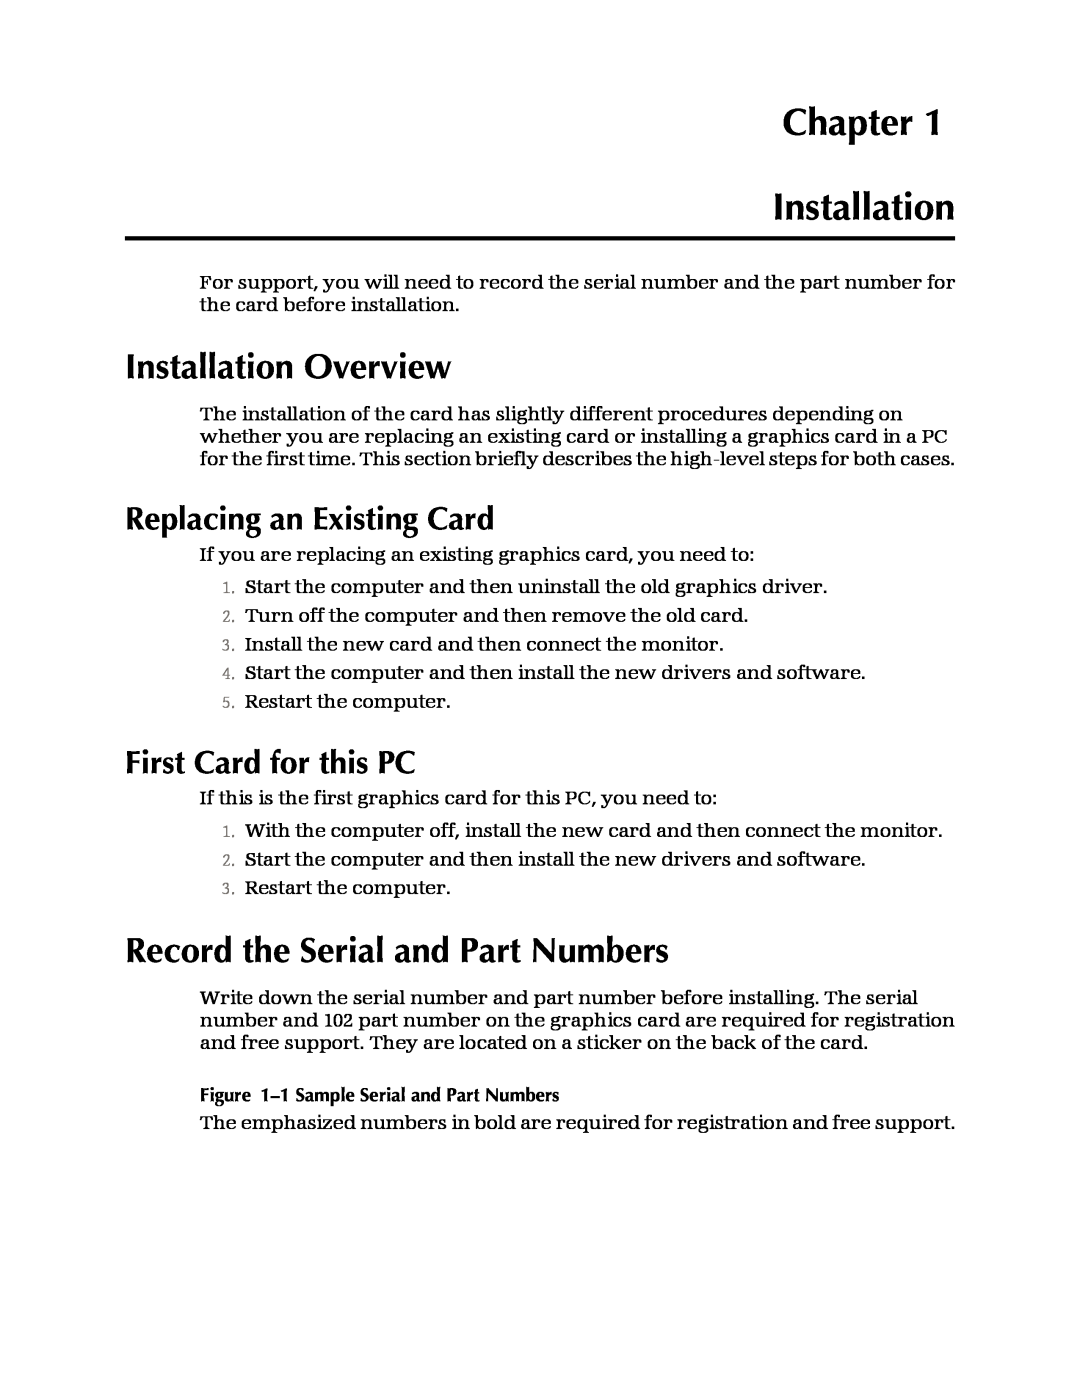 AMD 3600 manual Chapter Installation, Installation Overview, Record the Serial and Part Numbers, Replacing an Existing Card 